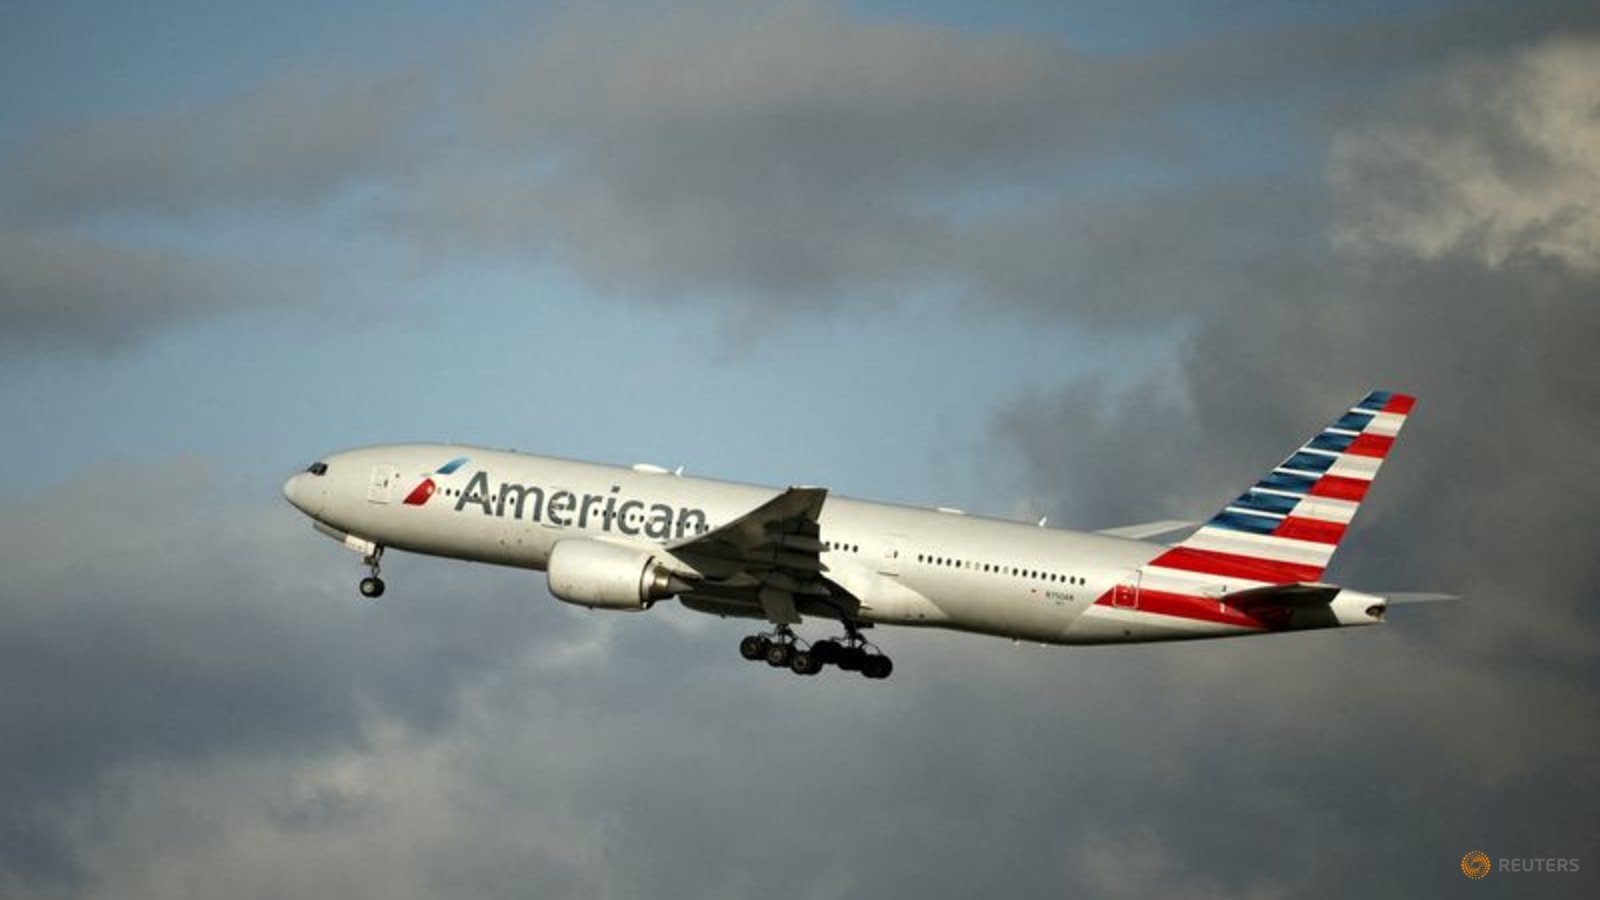 American Airlines warns 5G may result in 'major operational disruptions'